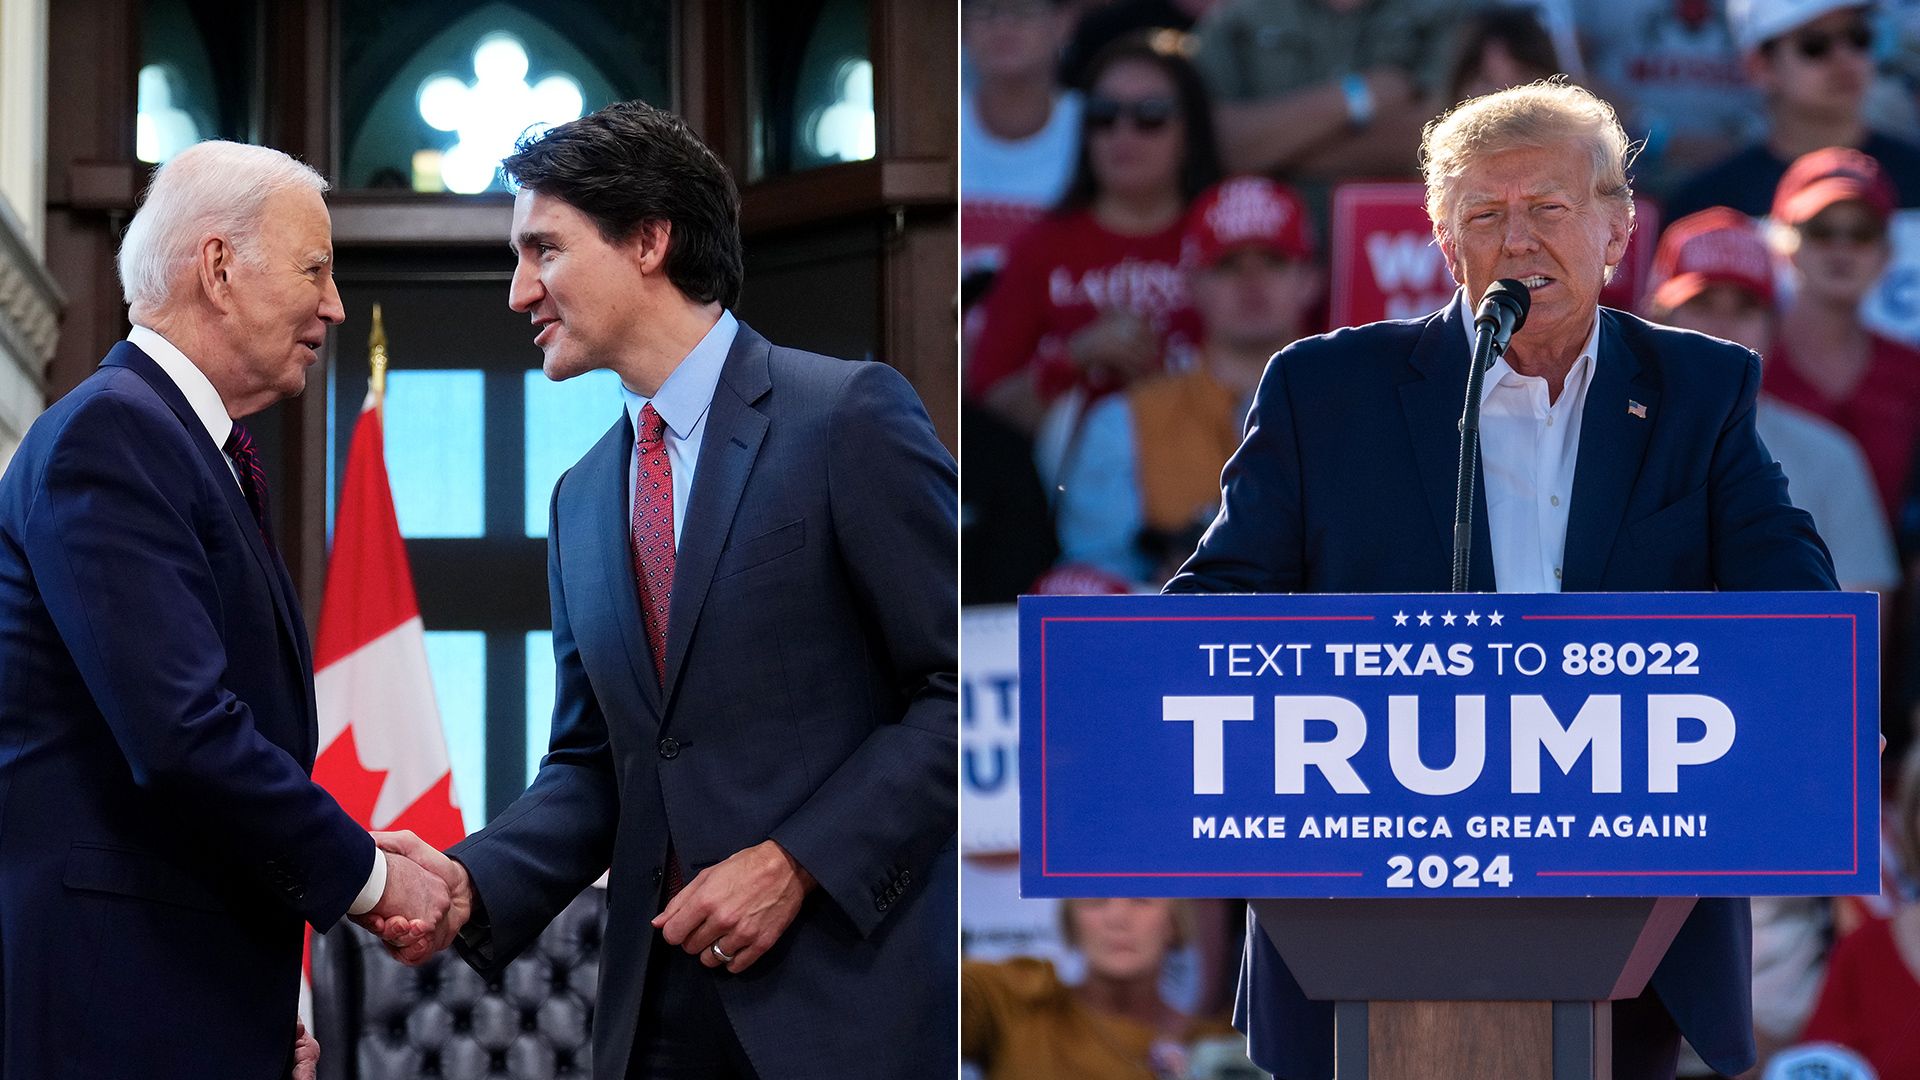 President Biden meets with Canadian Prime Minister Justin Trudeau Ottawa on Friday (left); former President Trump speaks to supporters at a rally in Waco, Texas, on Saturday.